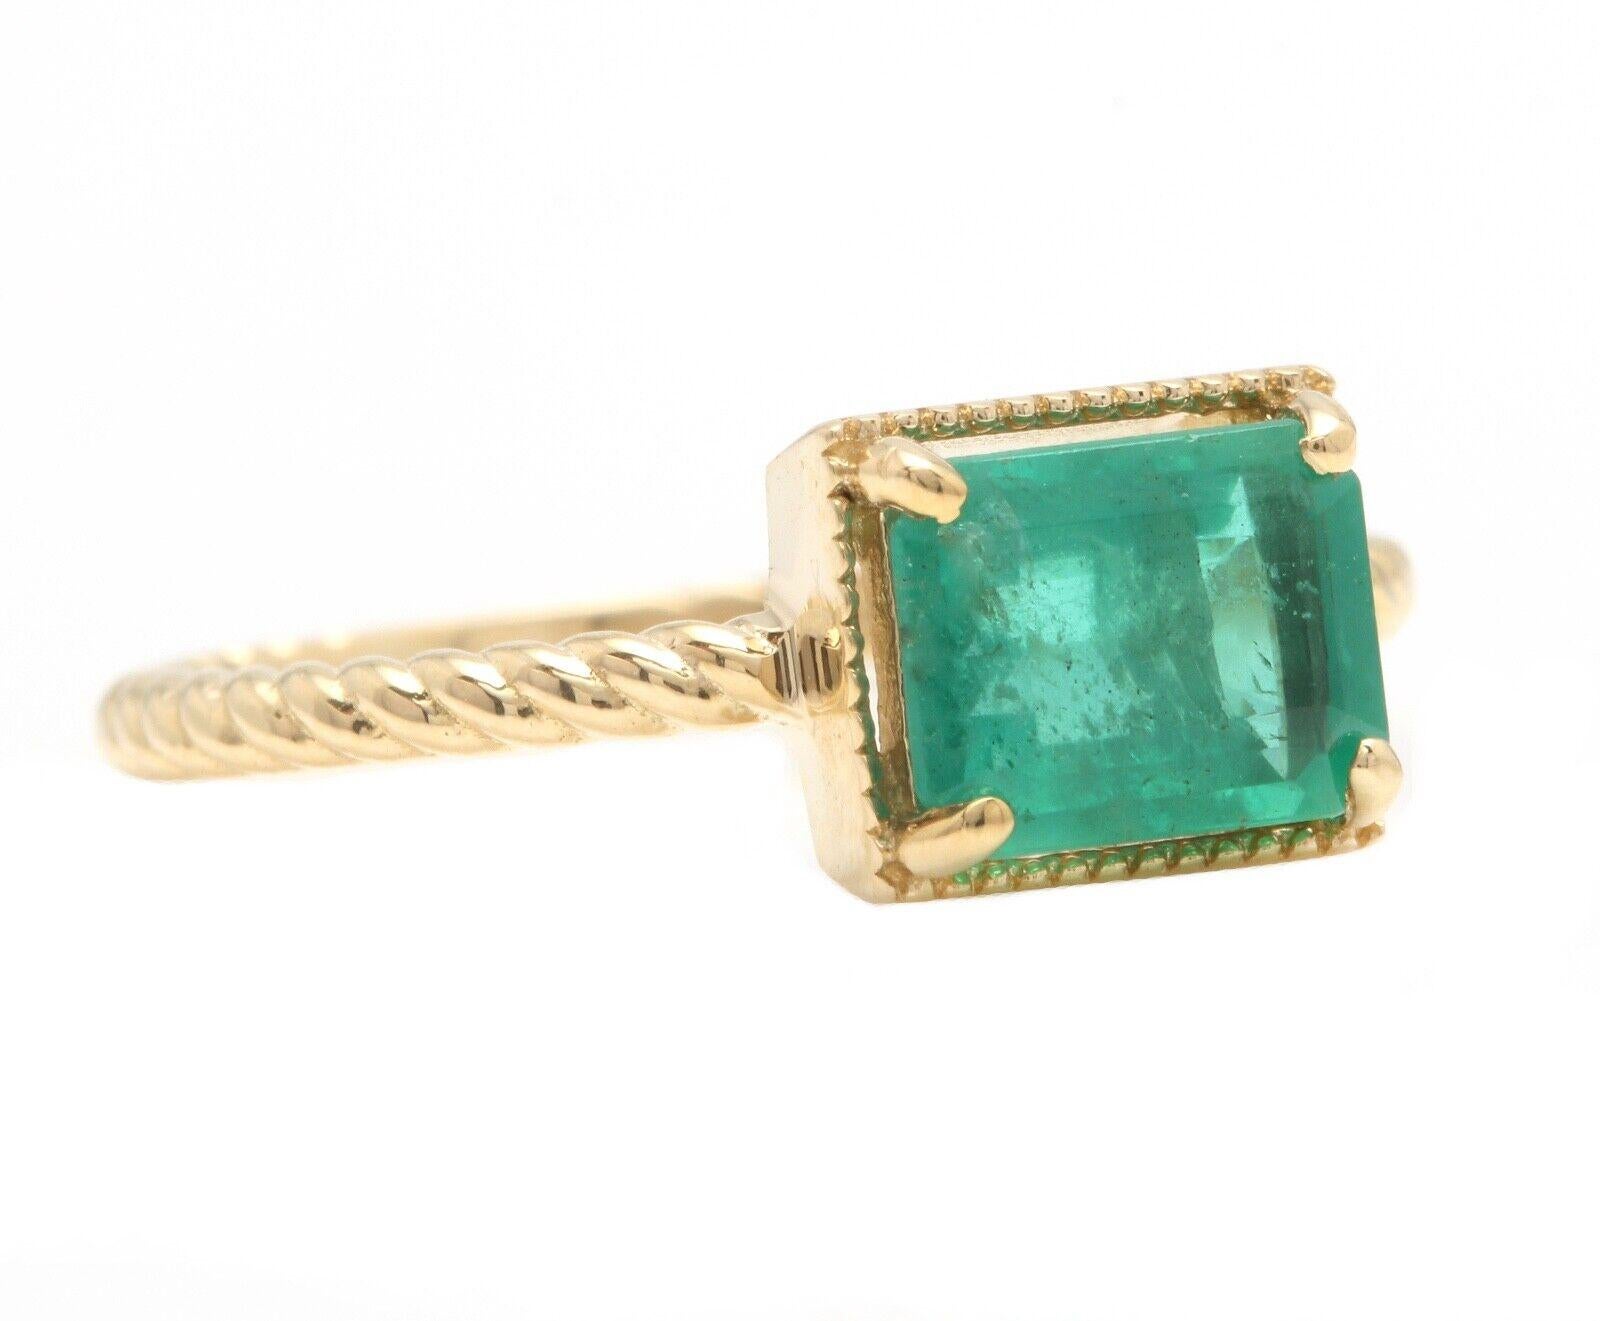 1.18 Carats Exquisite Natural Emerald 14K Solid Yellow Gold Ring

Total Natural Emerald Weight is: Approx. 1.18 Carats 

Emerald Measures: Approx. 7.90 x 5.95 mm

Emerald Treatment: Oiling

Ring size: 7 (free re-sizing available)

Ring total weight: